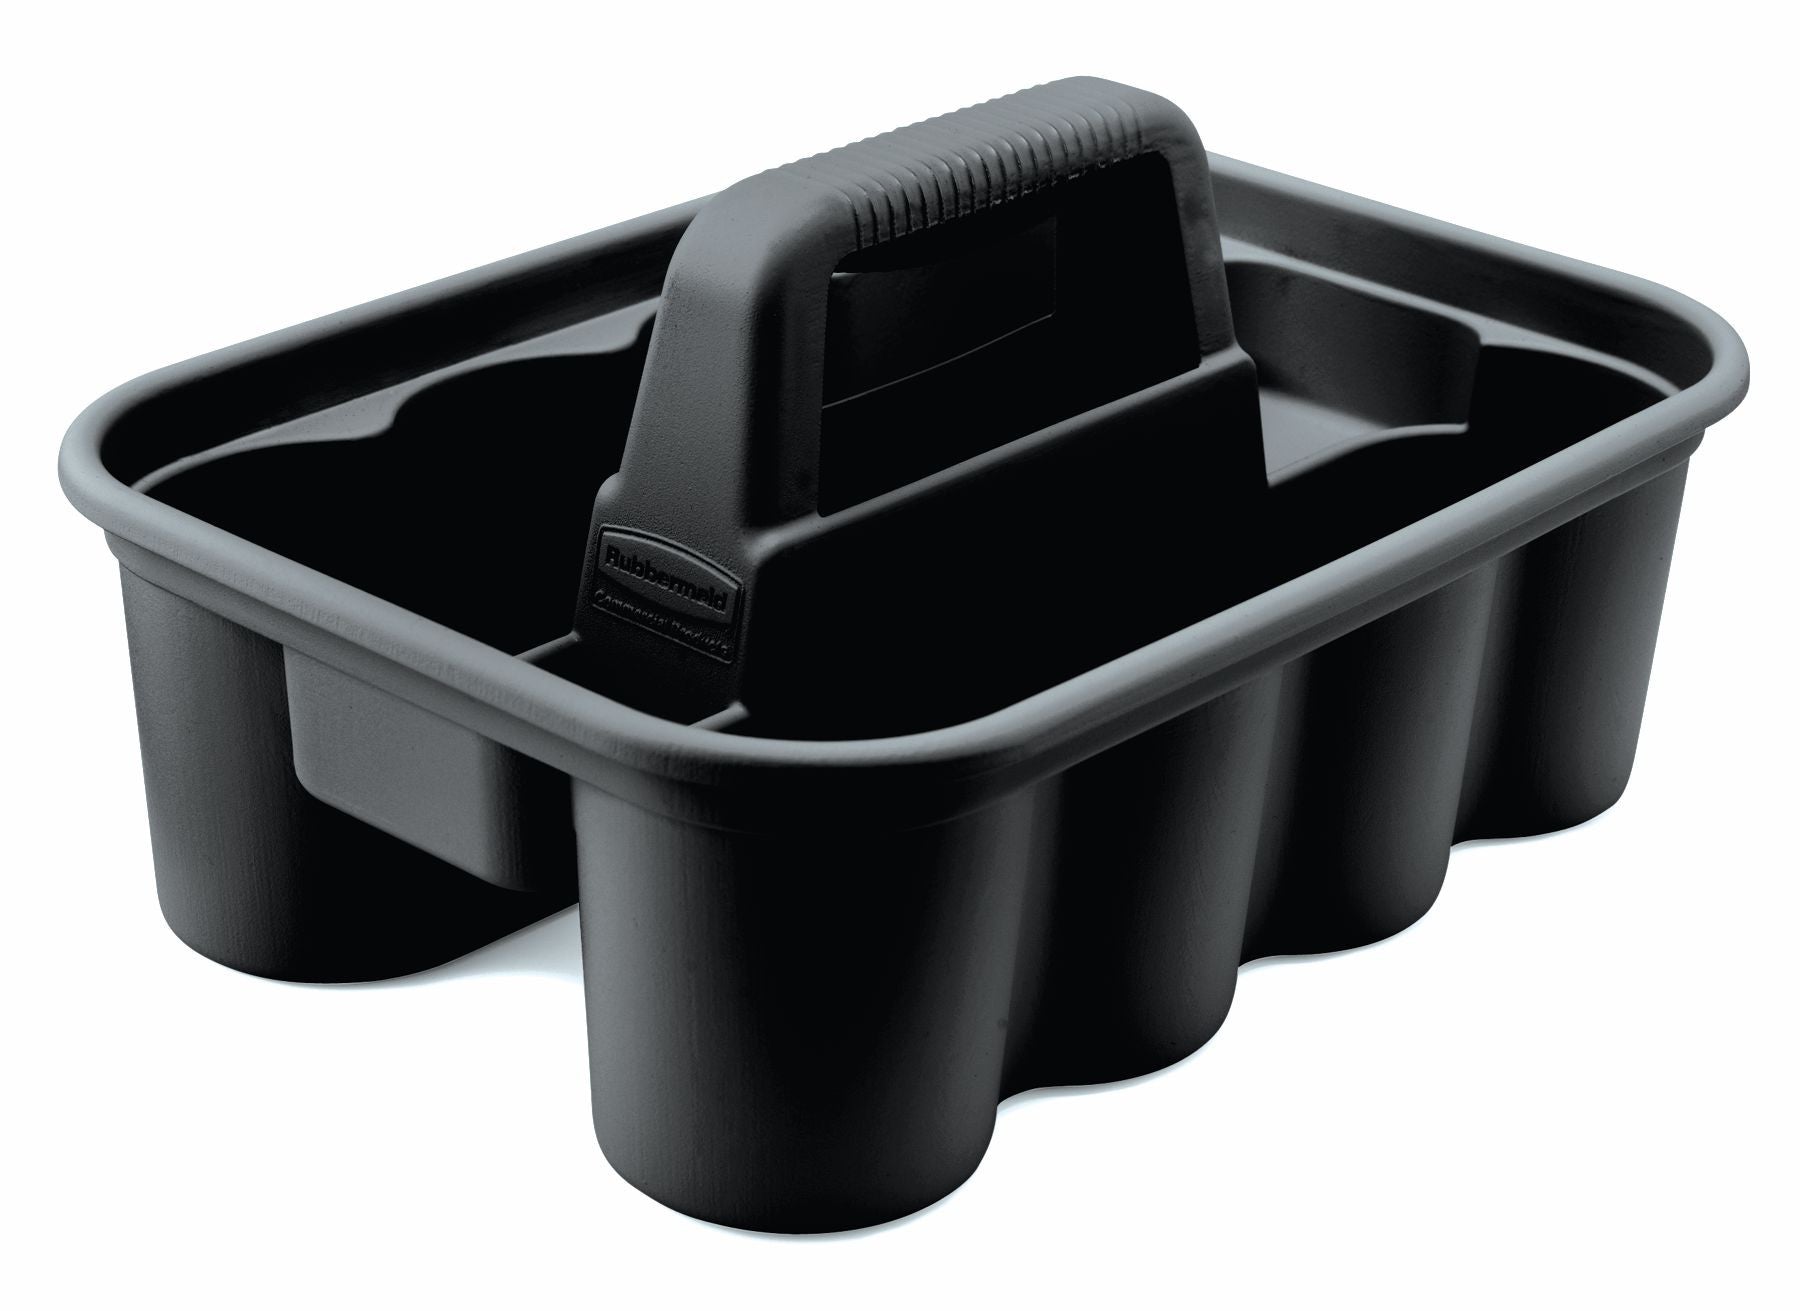 Rubbermaid Deluxe Carry Caddy 16x11x6¾ Allrubbermaid